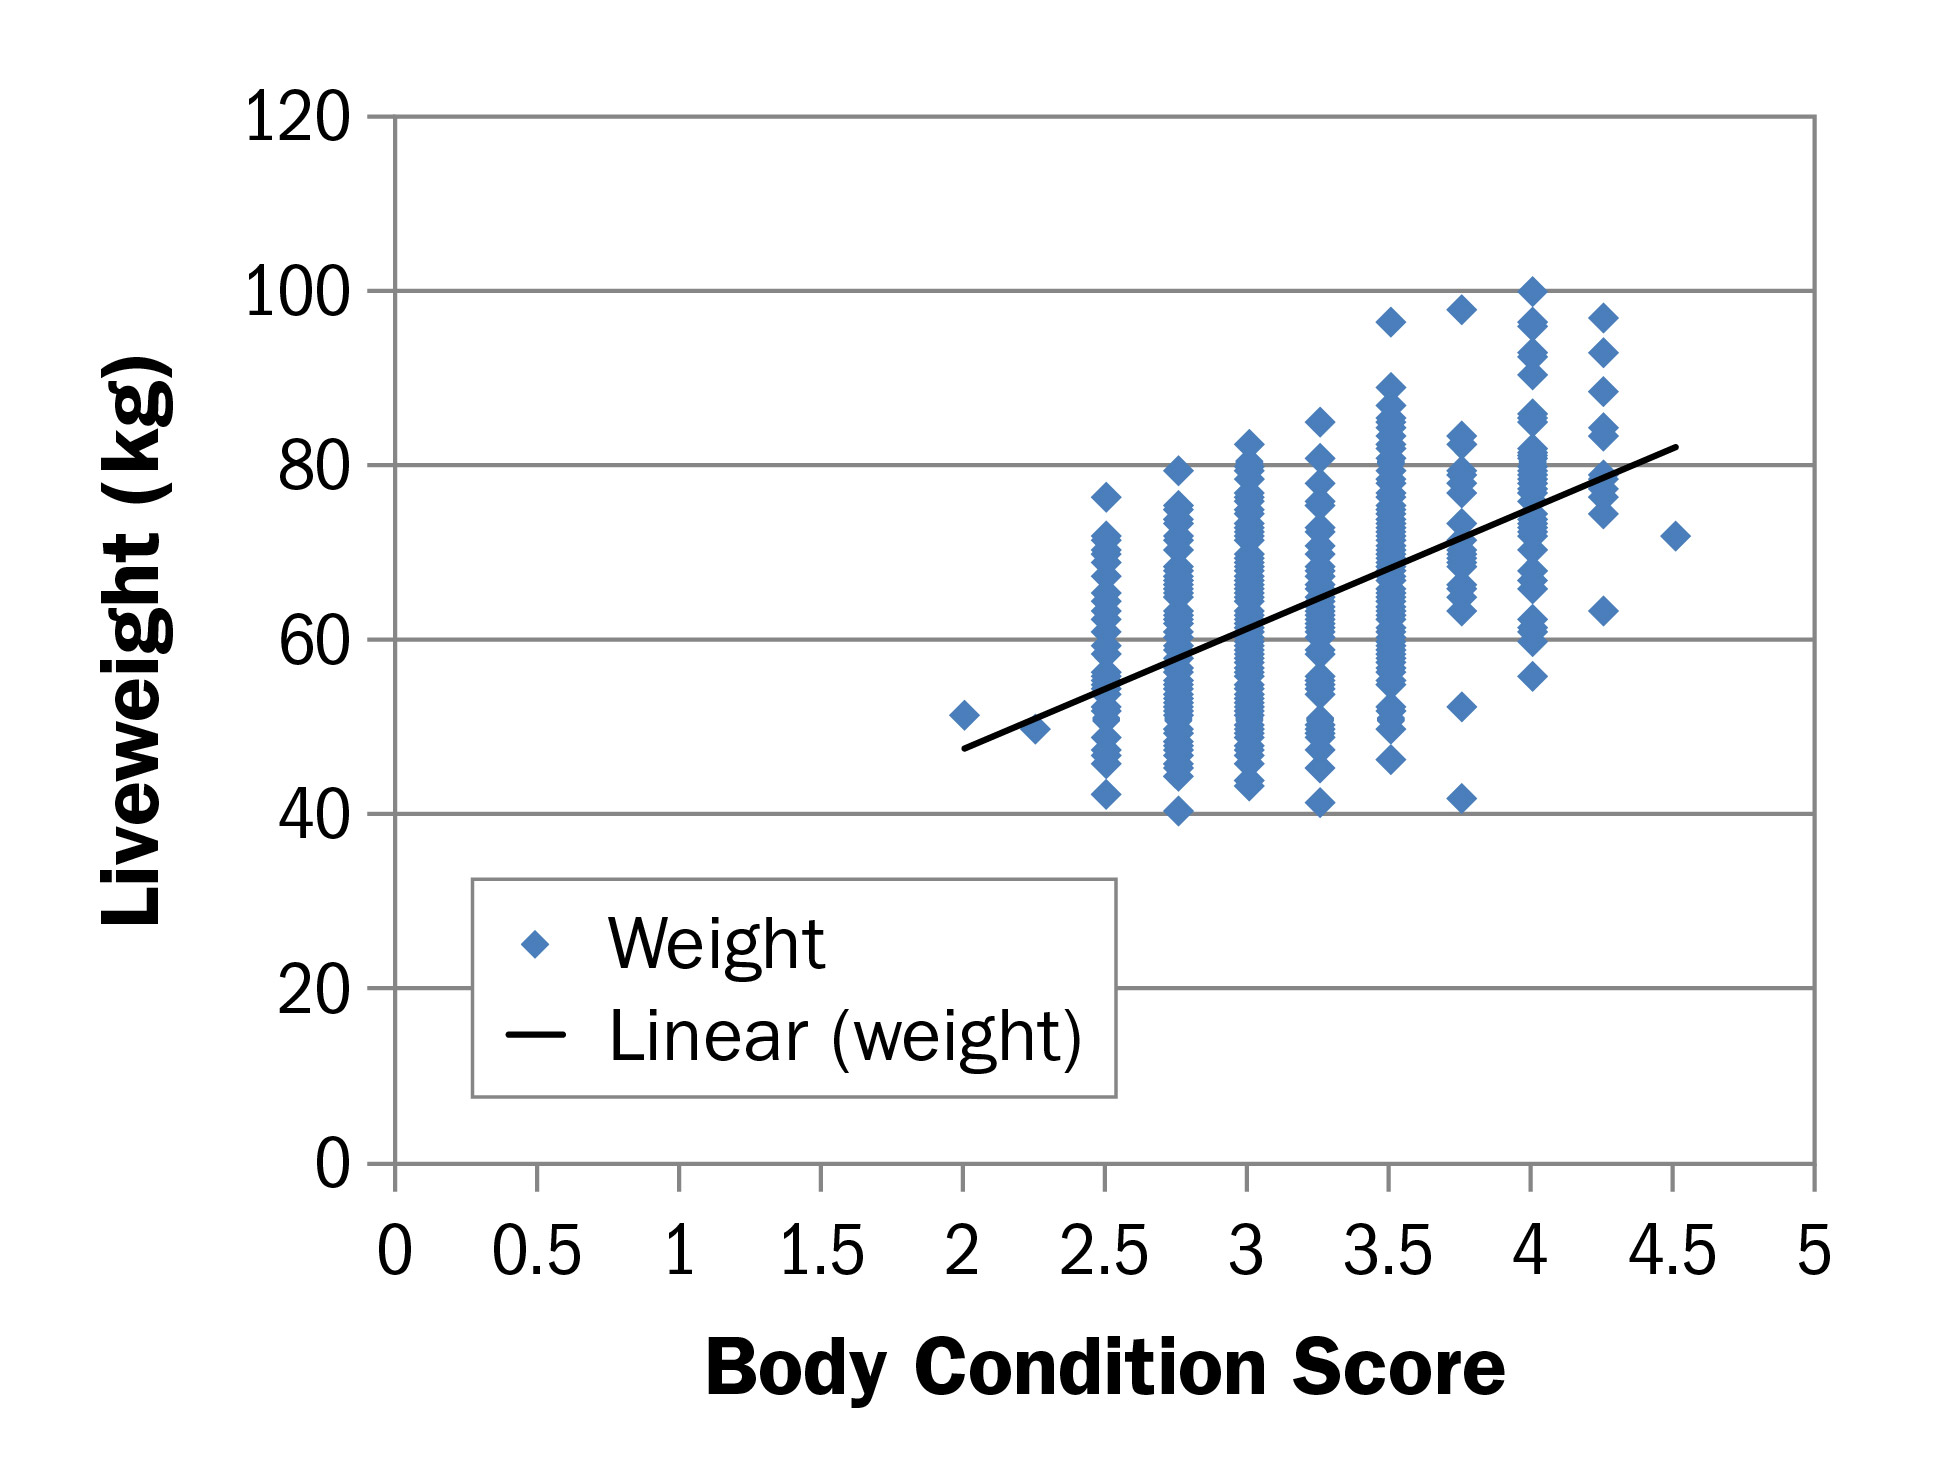 Scatter diagram with liveweight of 0 to 120 kilograms on left side and body condition score of 0 to 5 on the bottom axis. A cluster of dots are shown at about 2 to 4.5 score.